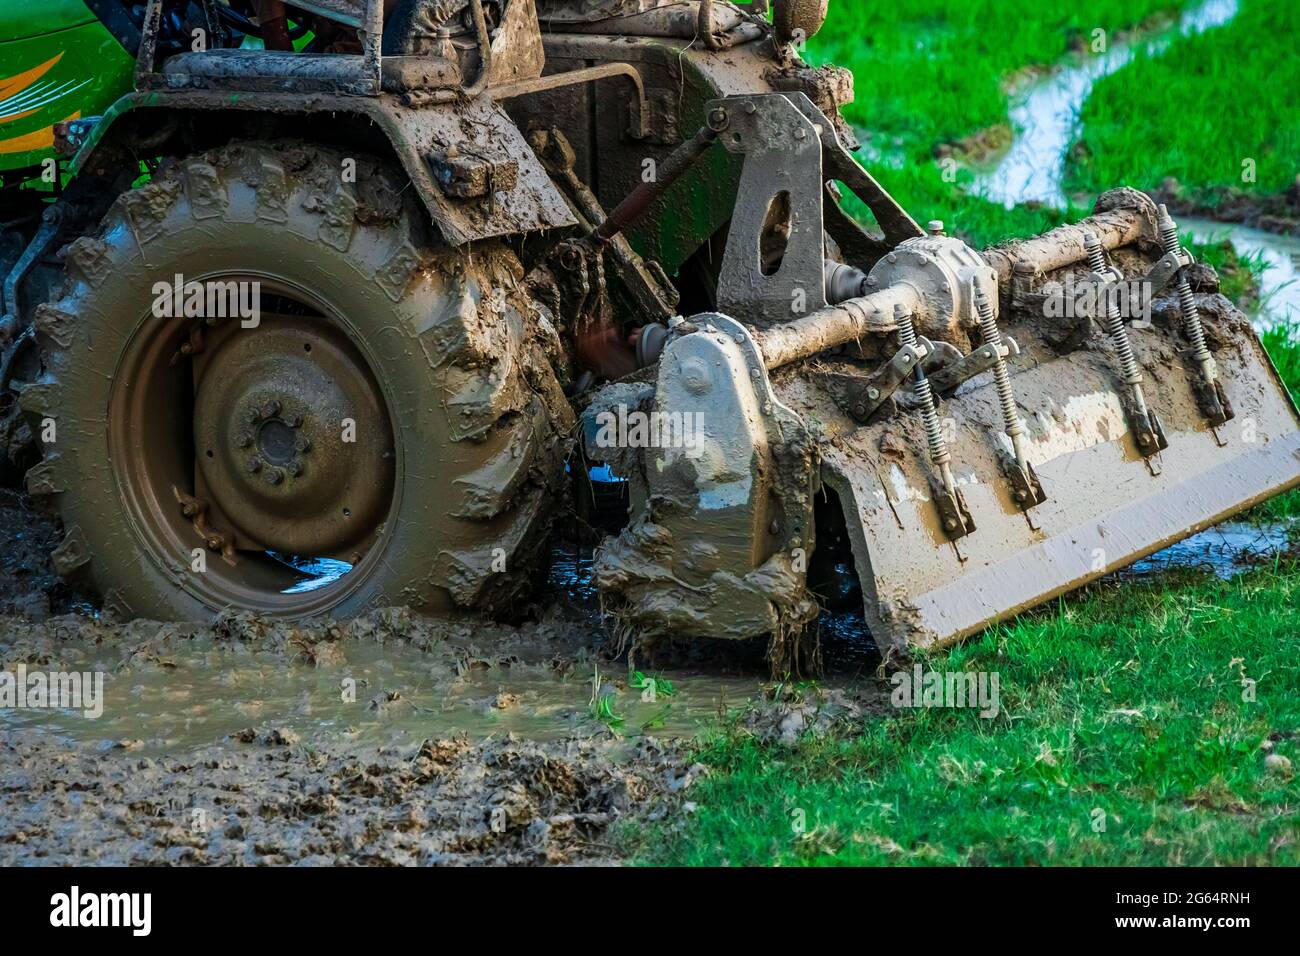 Tractor ploughs field. Close up shot of heavy machinery attached to the rear end of tractor covered in mud ploughs through the muddy field. Stock Photo